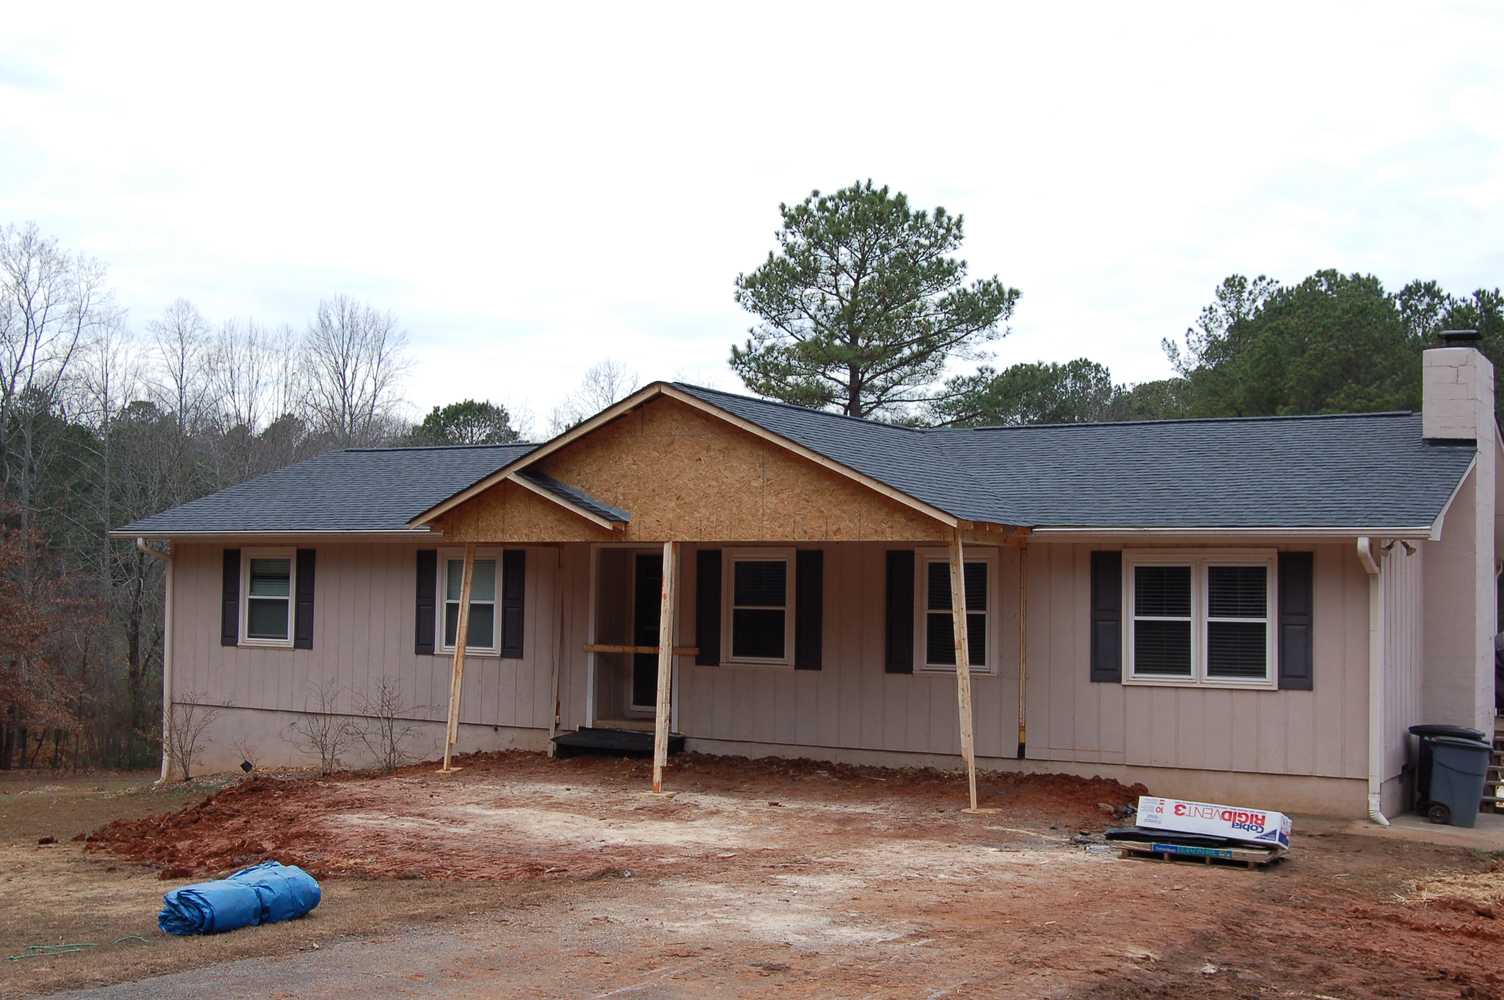 Fowler Homes Inc Garage addition and House Remodeling project.